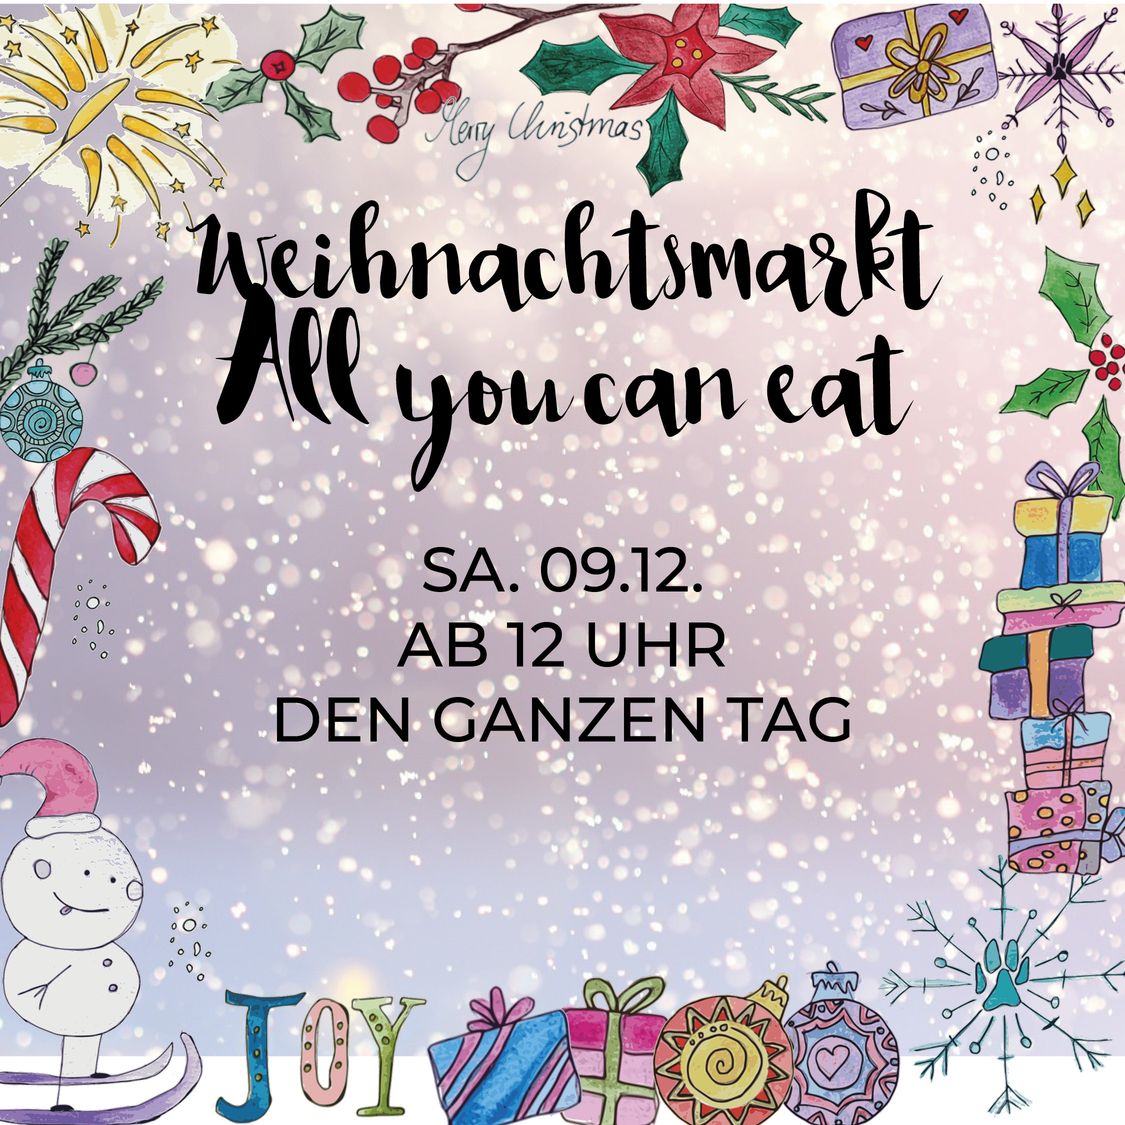 Weihnachtsmarkt - All you can eat